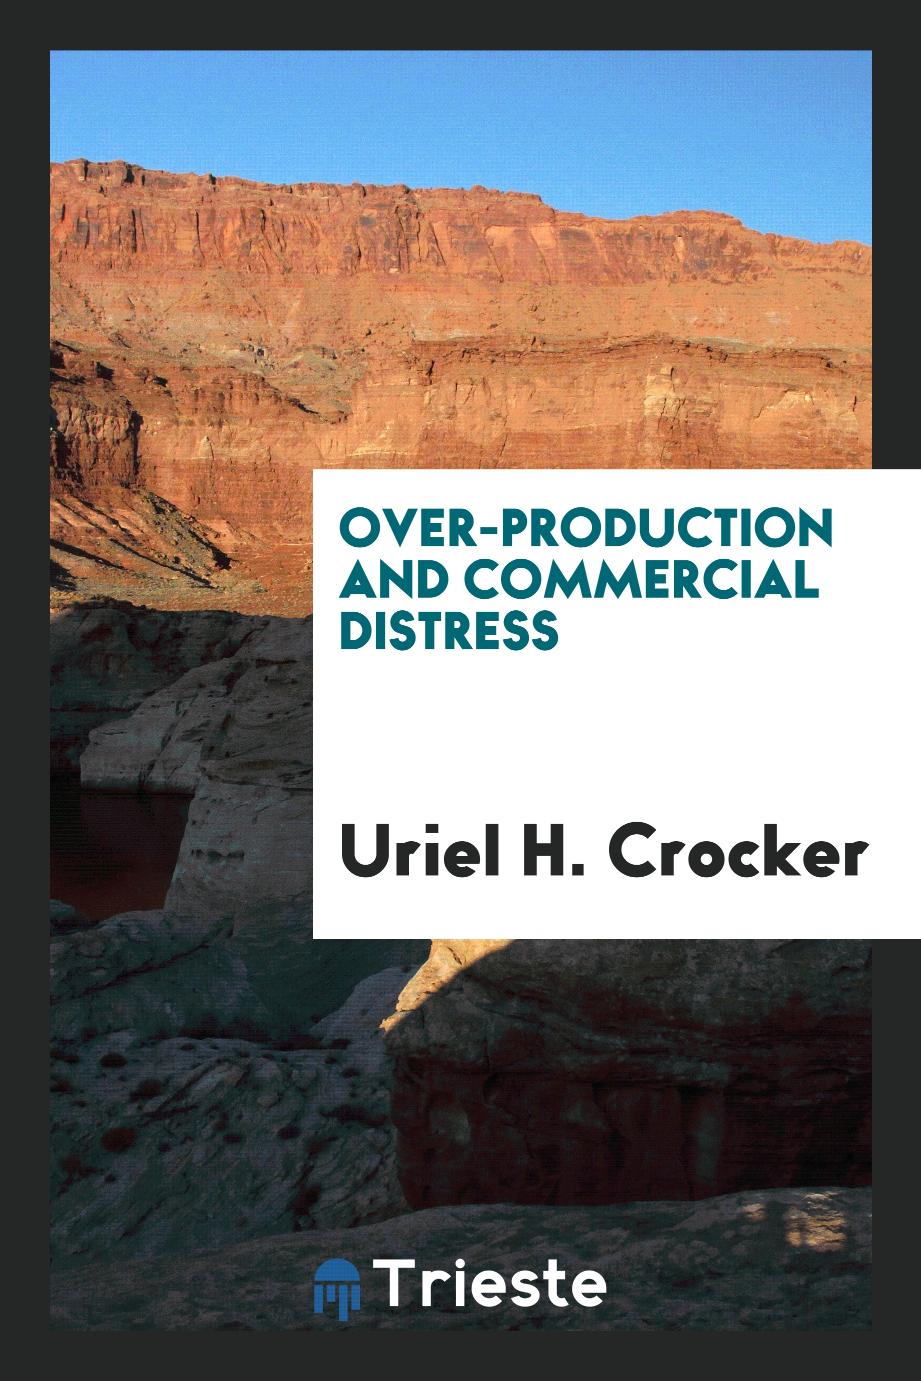 Over-production and commercial distress